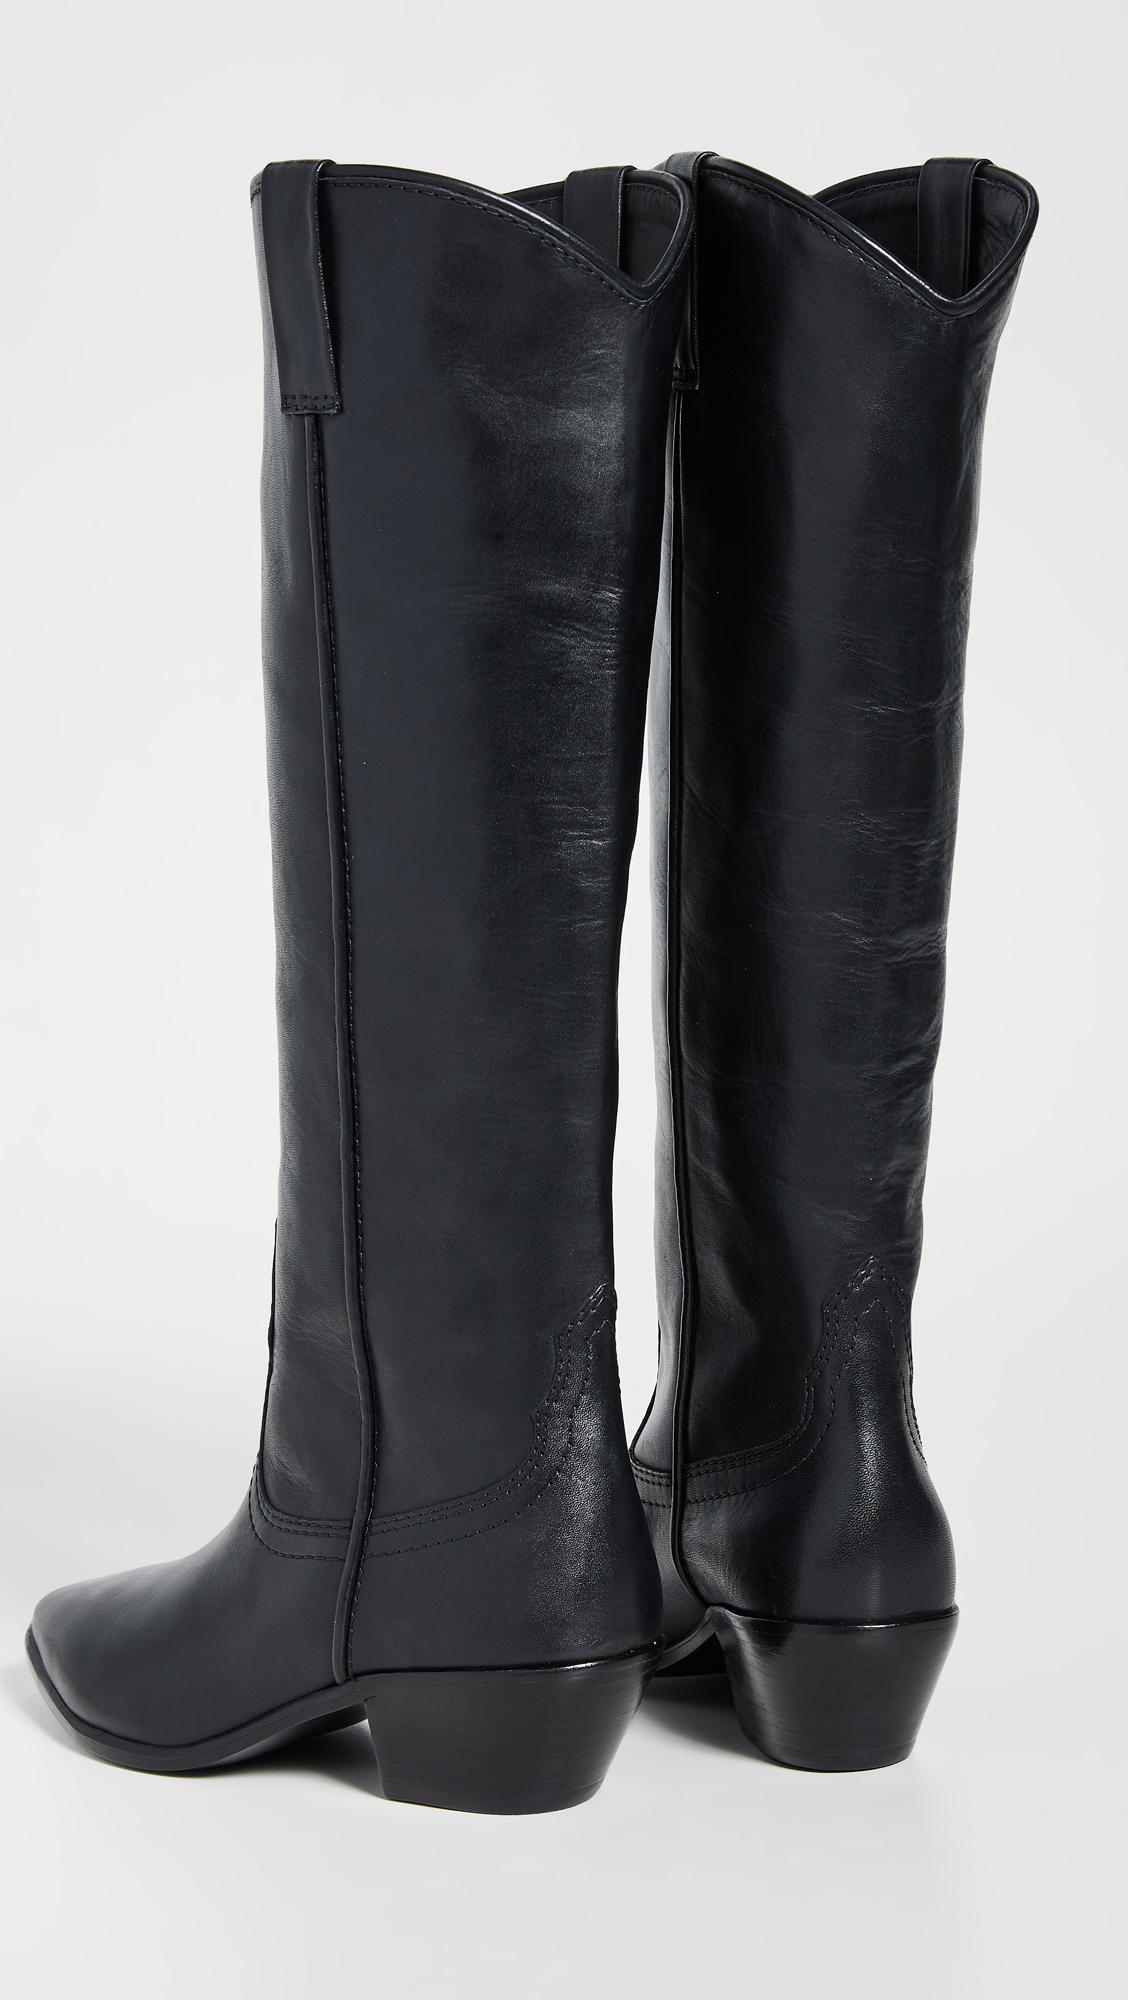 Loeffler Randall Leather Dylan Tall Western Boots in Black - Lyst